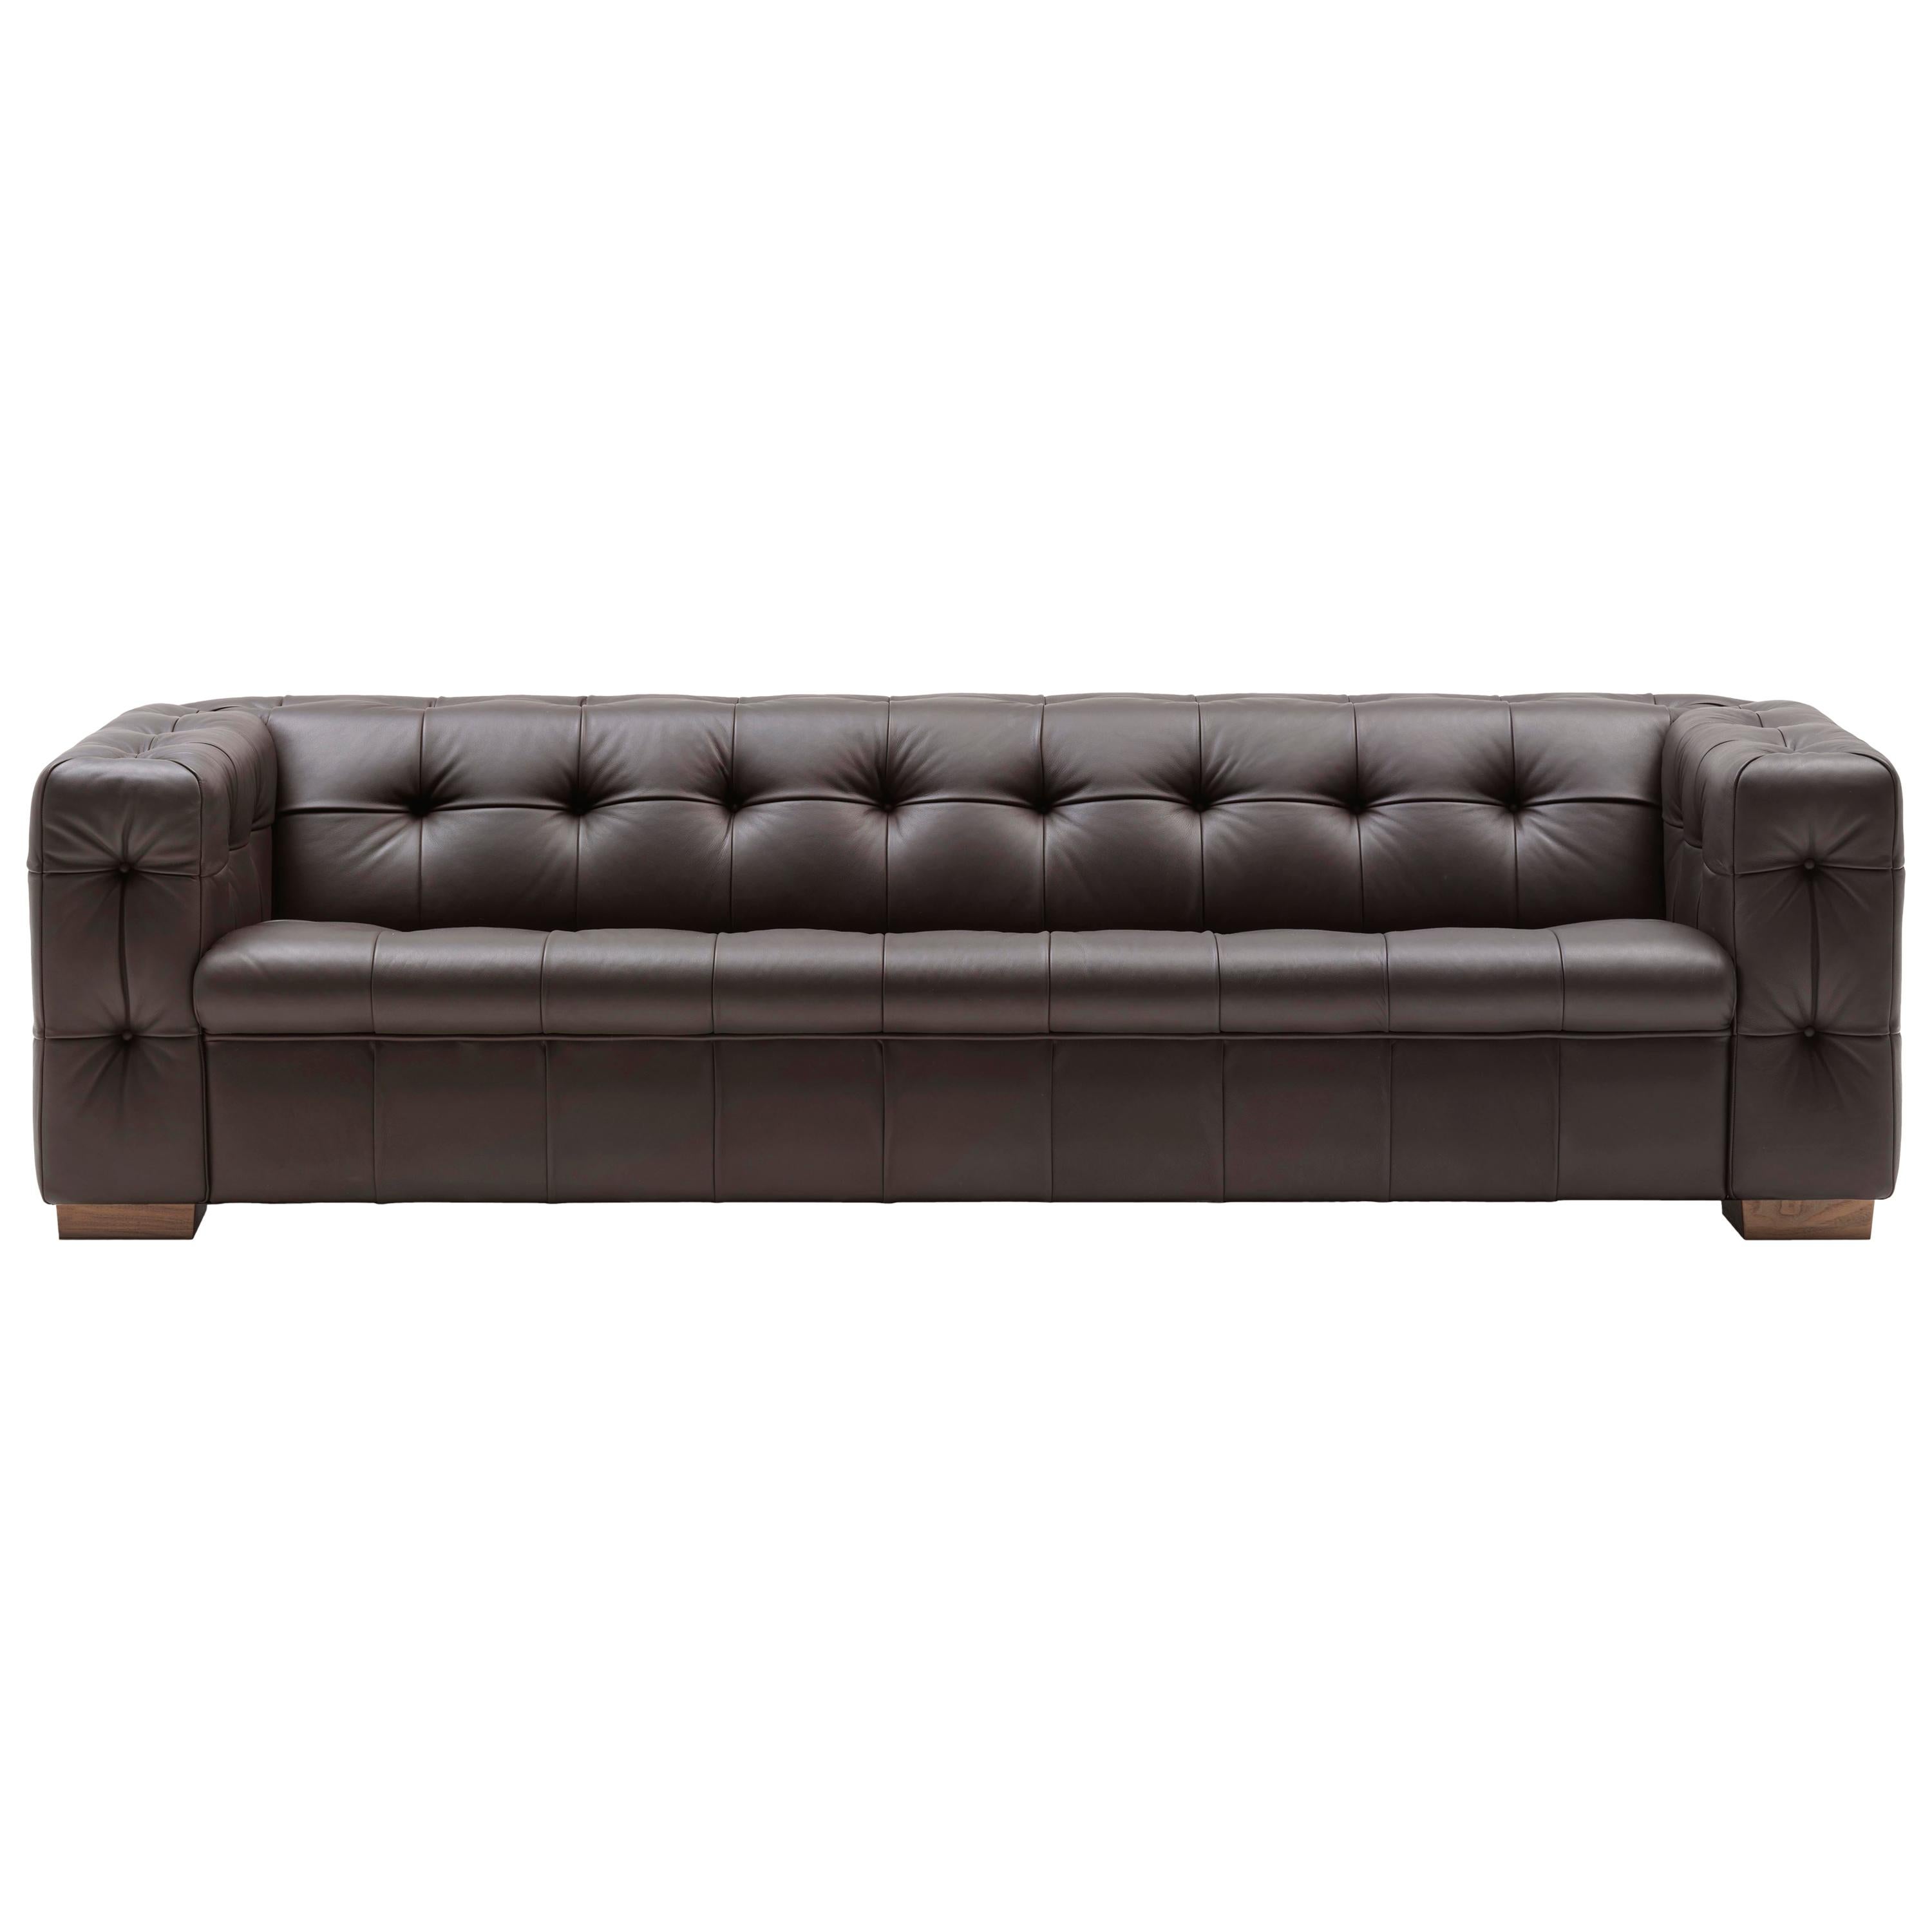 For Sale: Brown (Cigarro) RH-306 Large Tufted Leather Chesterfield Sofa by Robert Haussmann